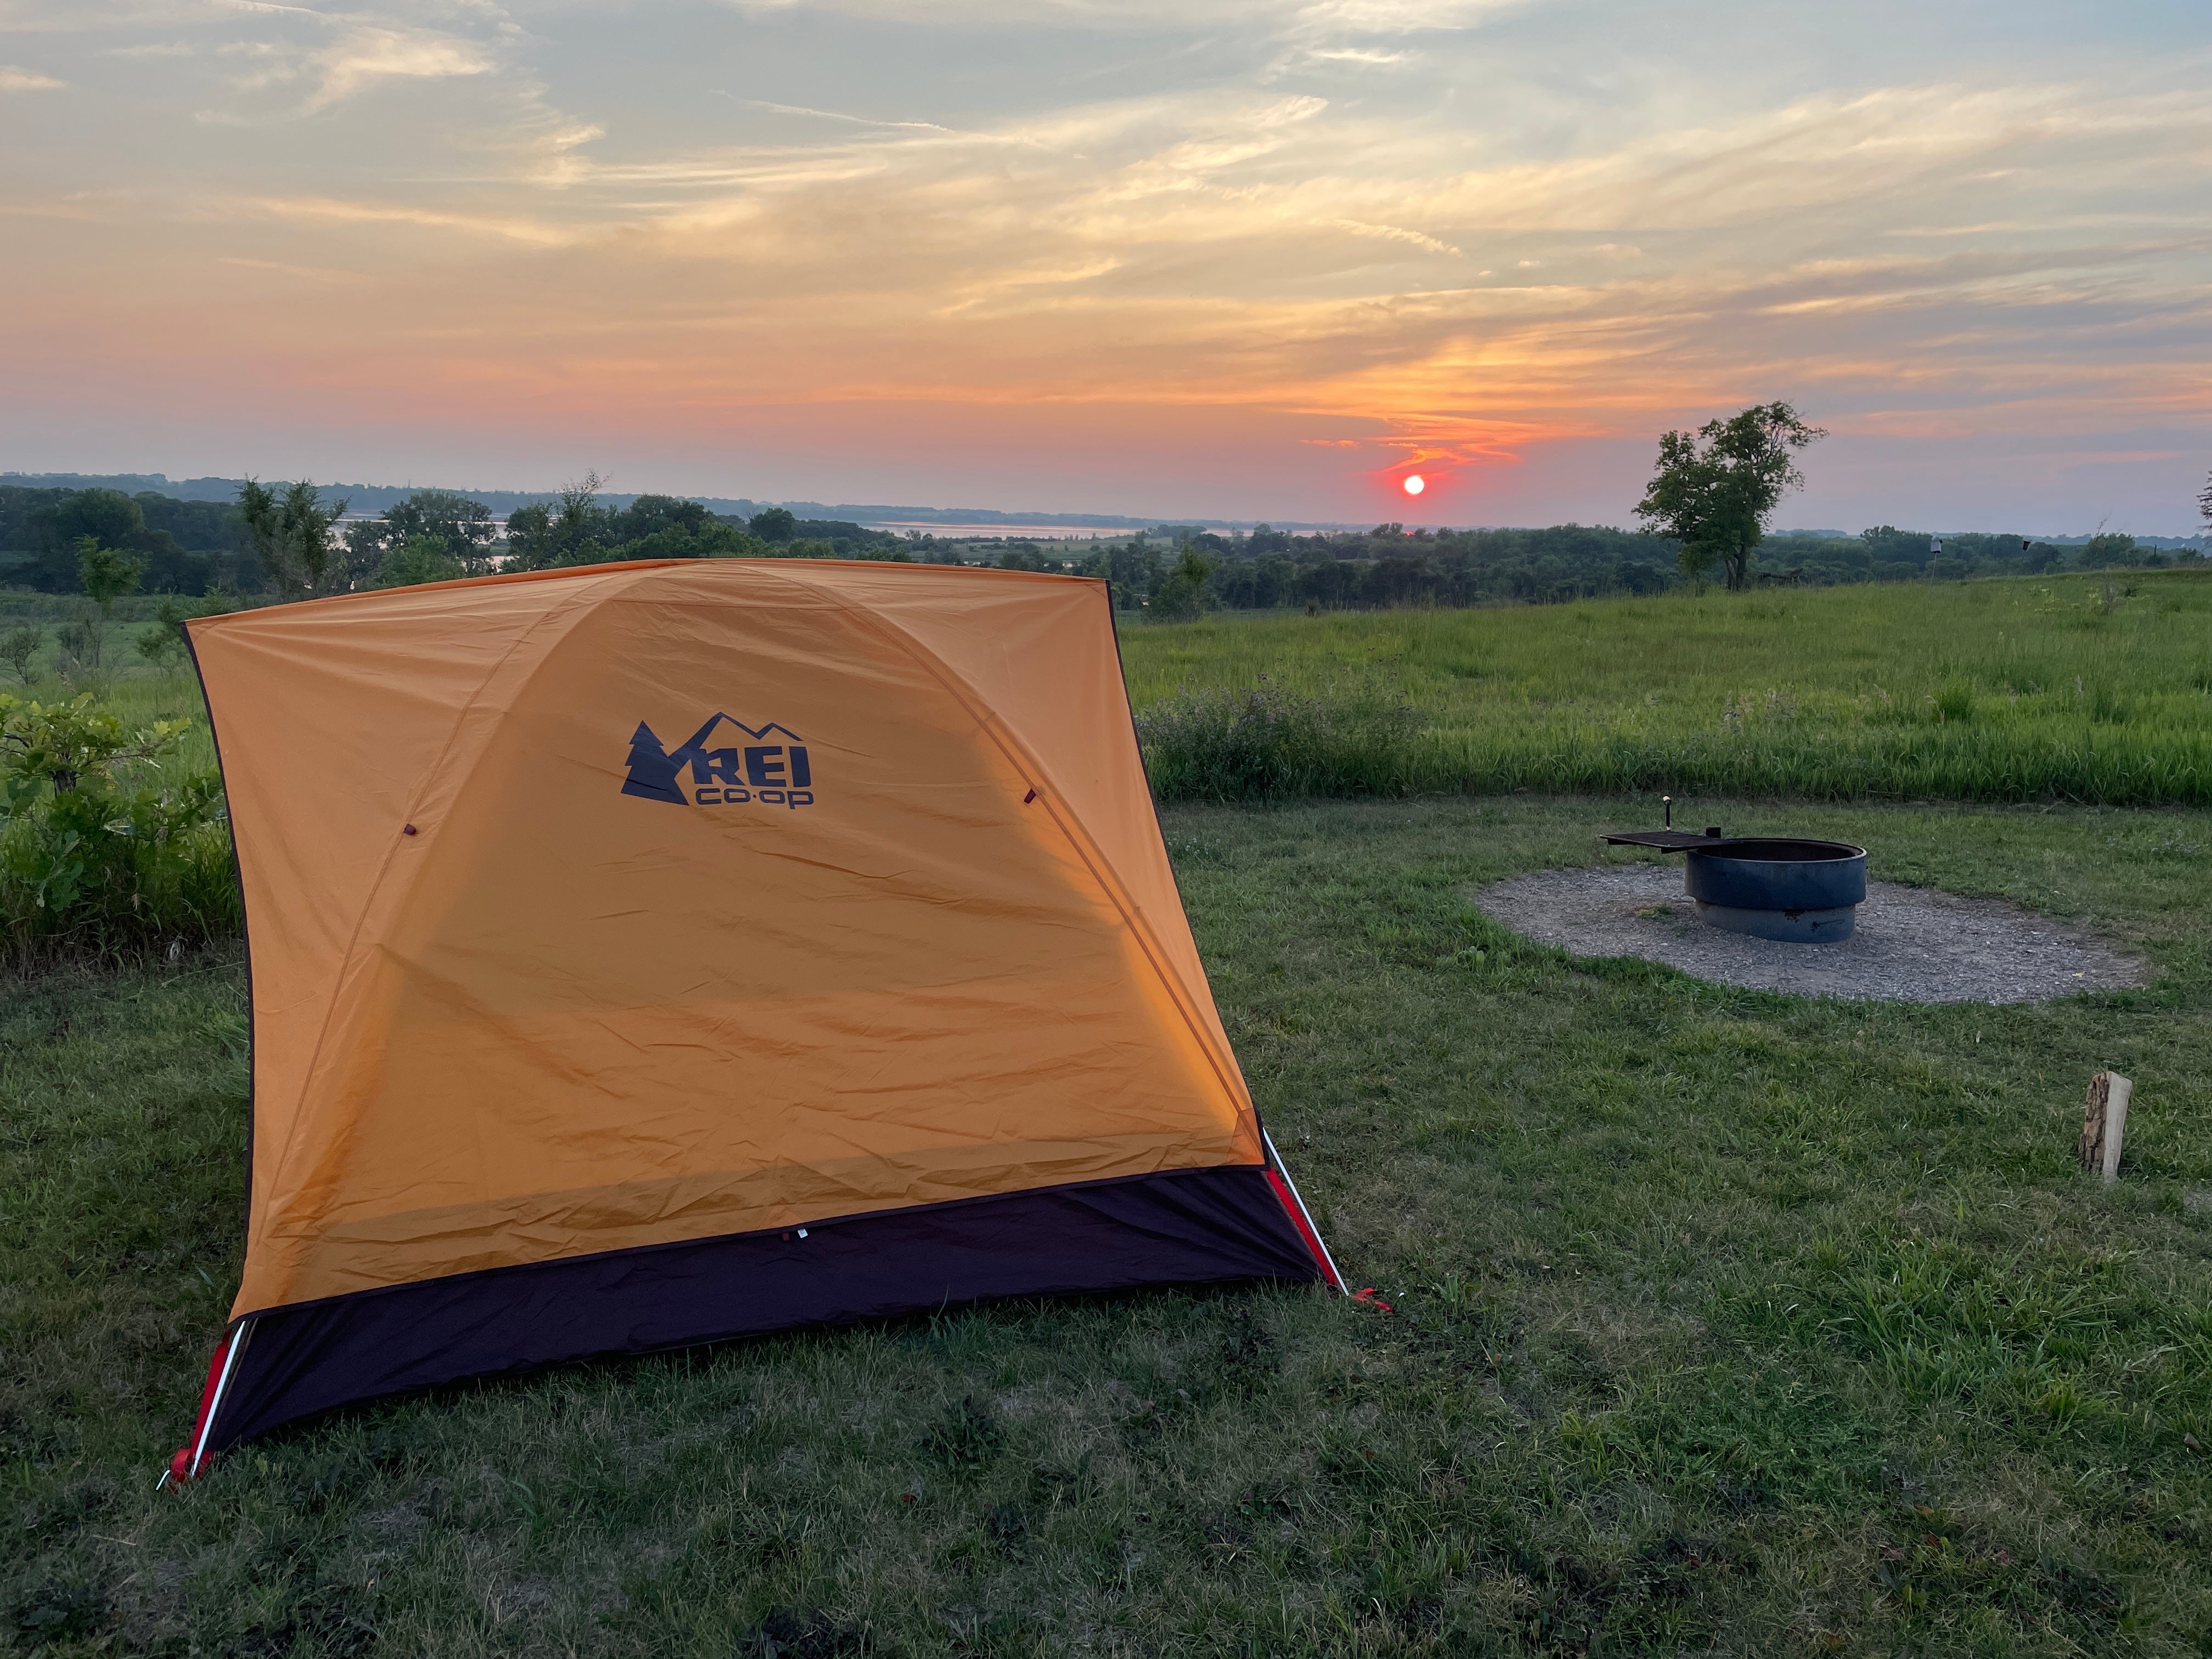 Camper submitted image from Lac qui parle county park - 1